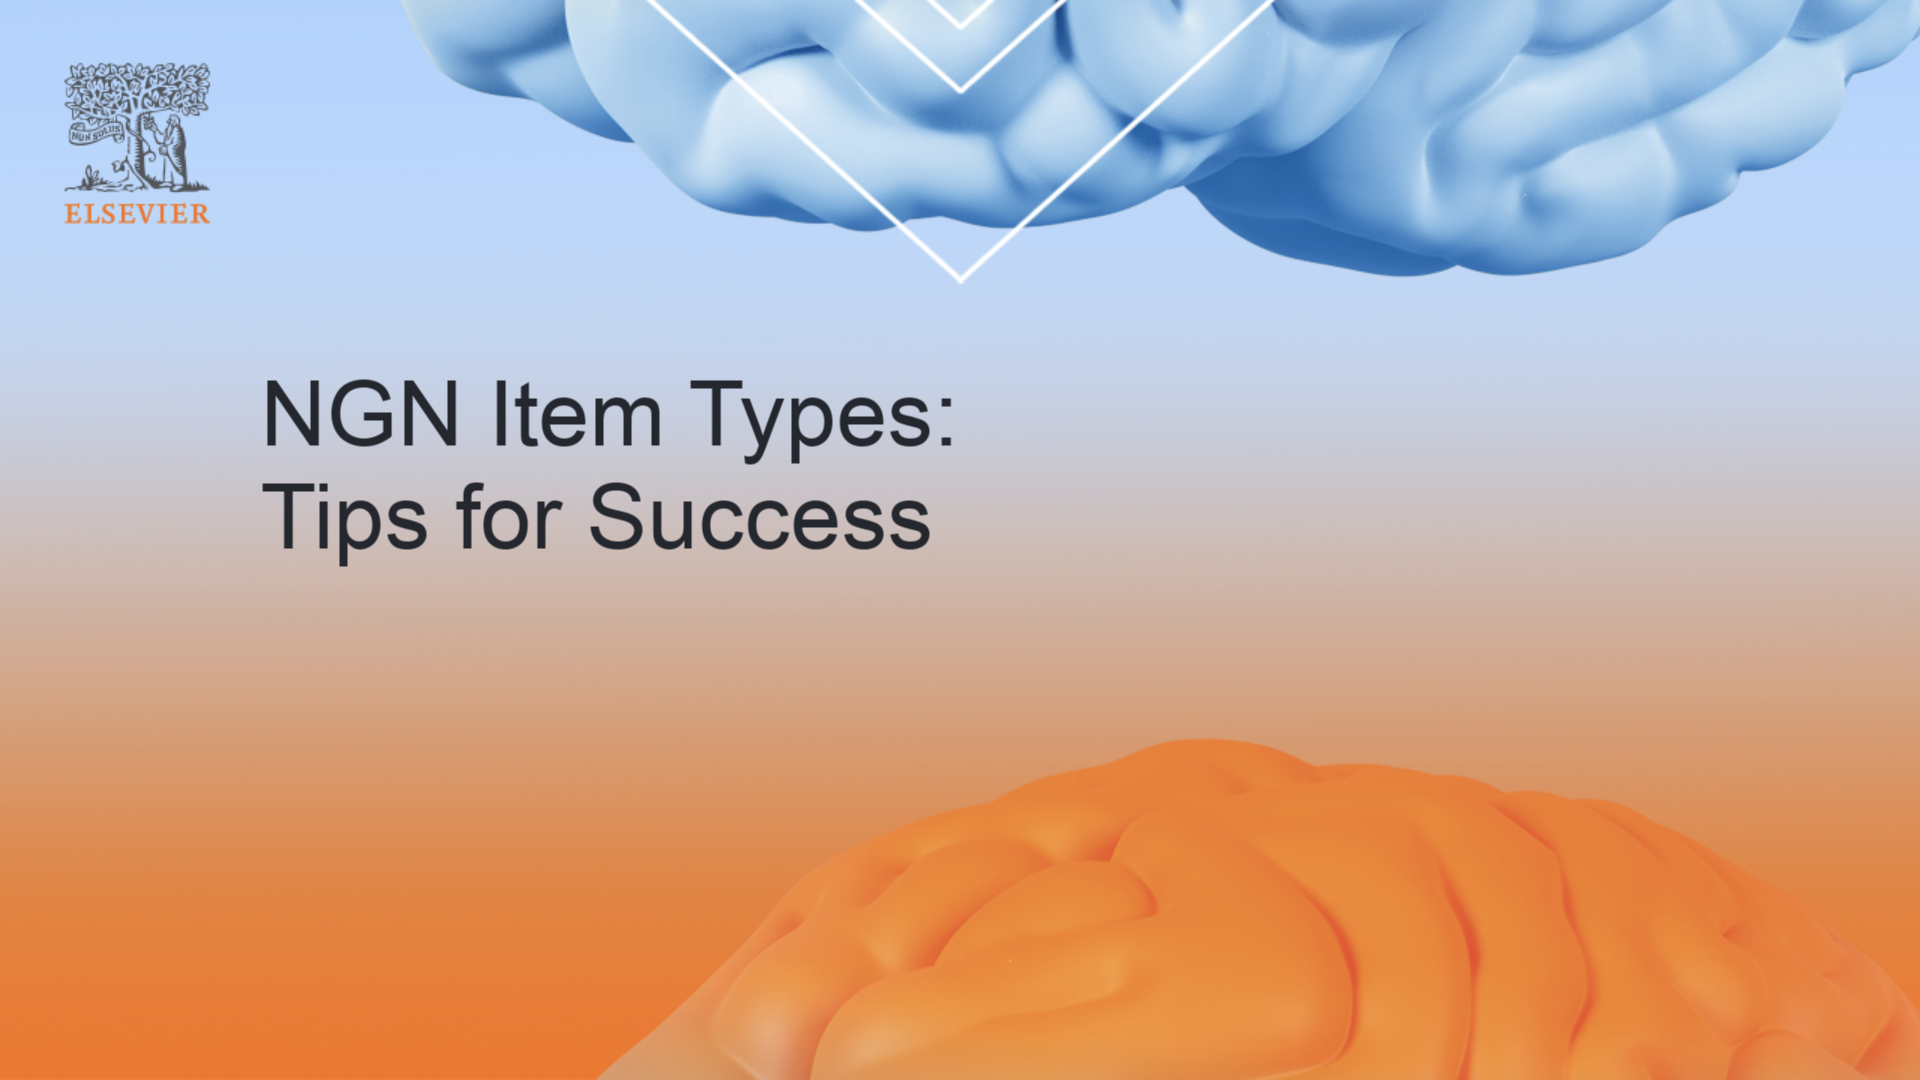 HESI® NG: NGN Item Types – Tips for Success